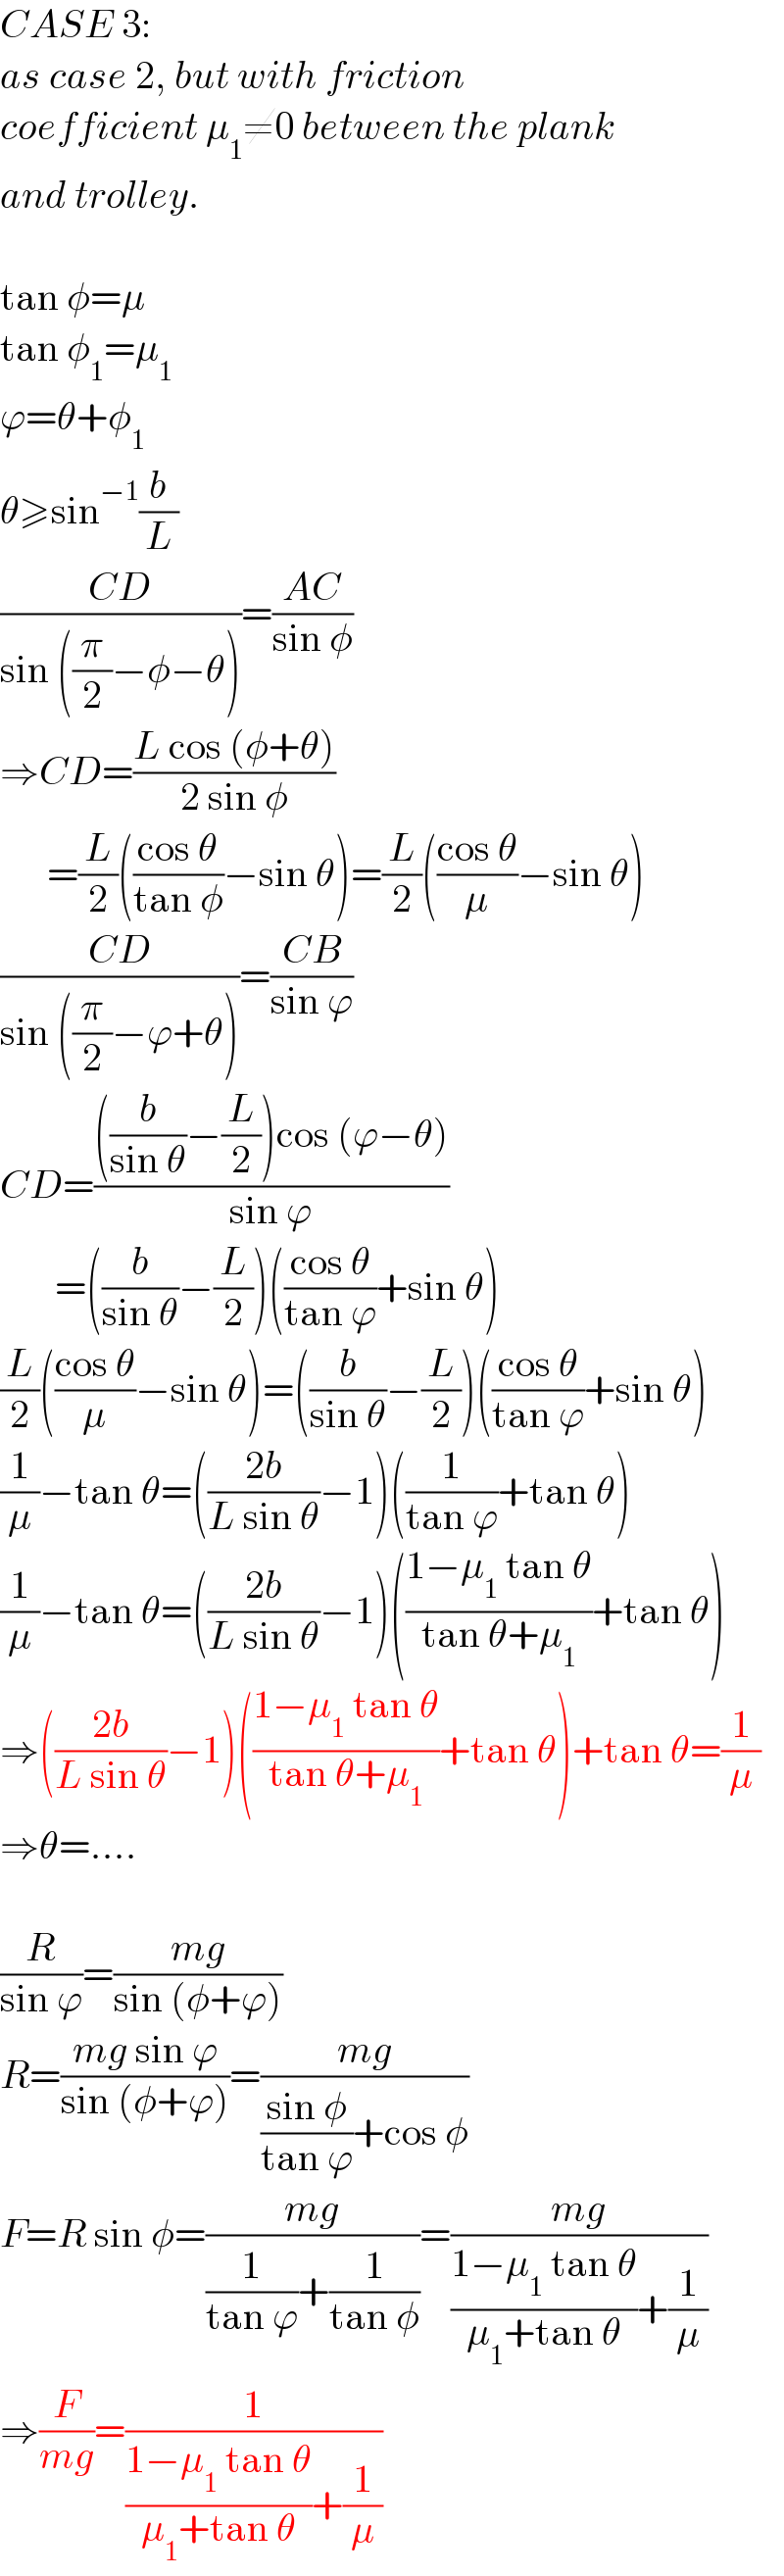 CASE 3:  as case 2, but with friction   coefficient μ_1 ≠0 between the plank   and trolley.     tan φ=μ  tan φ_1 =μ_1   ϕ=θ+φ_1   θ≥sin^(−1) (b/L)  ((CD)/(sin ((π/2)−φ−θ)))=((AC)/(sin φ))  ⇒CD=((L cos (φ+θ))/(2 sin φ))        =(L/2)(((cos θ)/(tan φ))−sin θ)=(L/2)(((cos θ)/μ)−sin θ)  ((CD)/(sin ((π/2)−ϕ+θ)))=((CB)/(sin ϕ))  CD=((((b/(sin θ))−(L/2))cos (ϕ−θ))/(sin ϕ))         =((b/(sin θ))−(L/2))(((cos θ)/(tan ϕ))+sin θ)  (L/2)(((cos θ)/μ)−sin θ)=((b/(sin θ))−(L/2))(((cos θ)/(tan ϕ))+sin θ)  (1/μ)−tan θ=(((2b)/(L sin θ))−1)((1/(tan ϕ))+tan θ)  (1/μ)−tan θ=(((2b)/(L sin θ))−1)(((1−μ_1  tan θ)/(tan θ+μ_1 ))+tan θ)  ⇒(((2b)/(L sin θ))−1)(((1−μ_1  tan θ)/(tan θ+μ_1 ))+tan θ)+tan θ=(1/μ)  ⇒θ=....    (R/(sin ϕ))=((mg)/(sin (φ+ϕ)))  R=((mg sin ϕ)/(sin (φ+ϕ)))=((mg)/(((sin φ)/(tan ϕ))+cos φ))  F=R sin φ=((mg)/((1/(tan ϕ))+(1/(tan φ))))=((mg)/(((1−μ_1  tan θ)/(μ_1 +tan θ))+(1/μ)))  ⇒(F/(mg))=(1/(((1−μ_1  tan θ)/(μ_1 +tan θ))+(1/μ)))  